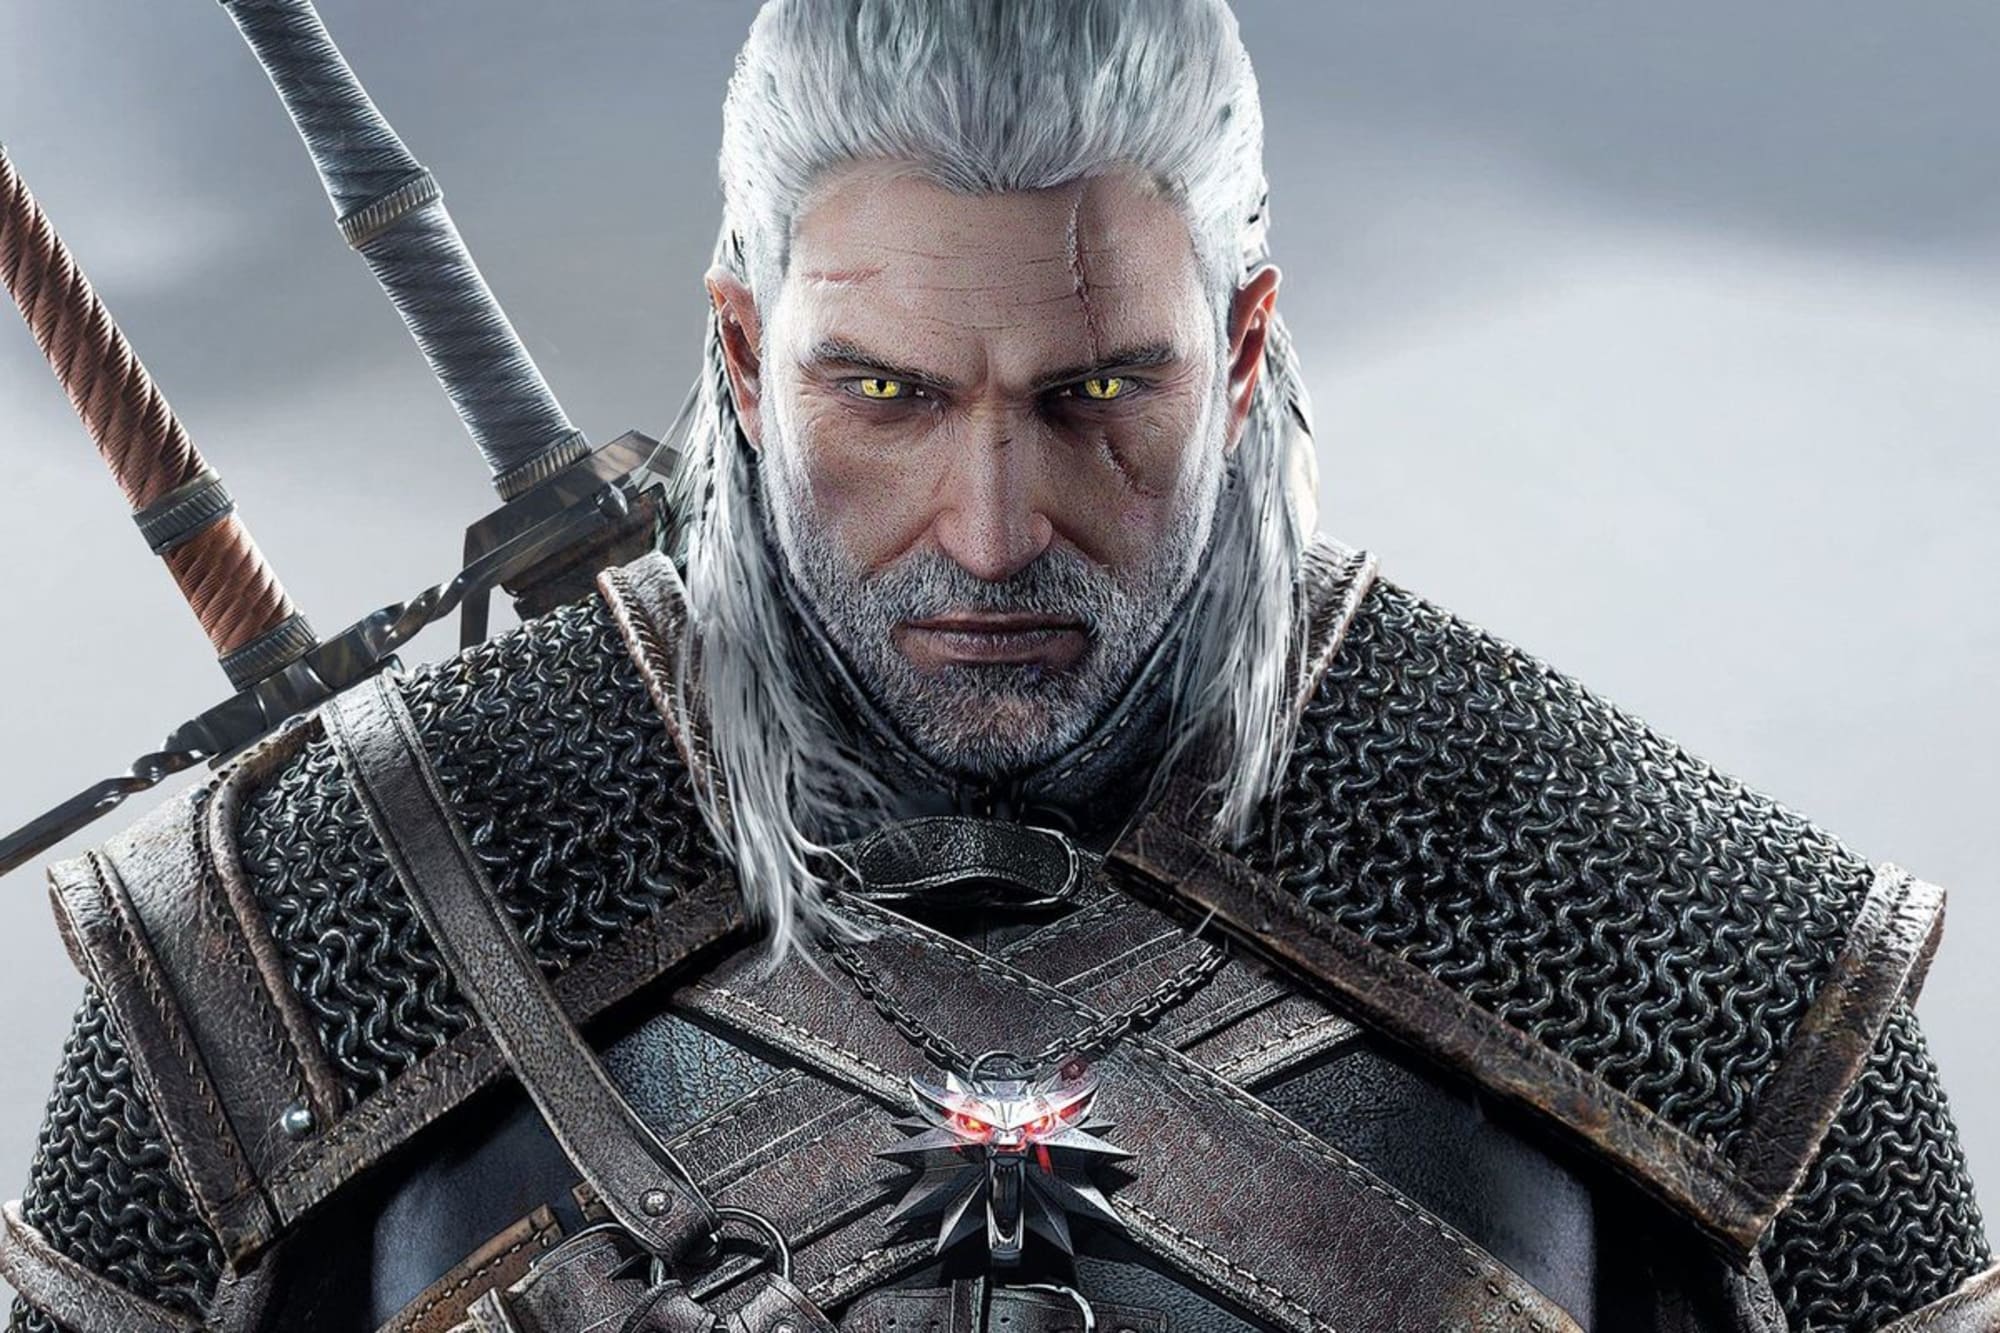 CD Projekt Red Has Announced The Release of The New Witcher Trilogy and the Cyberpunk 2077 Sequel